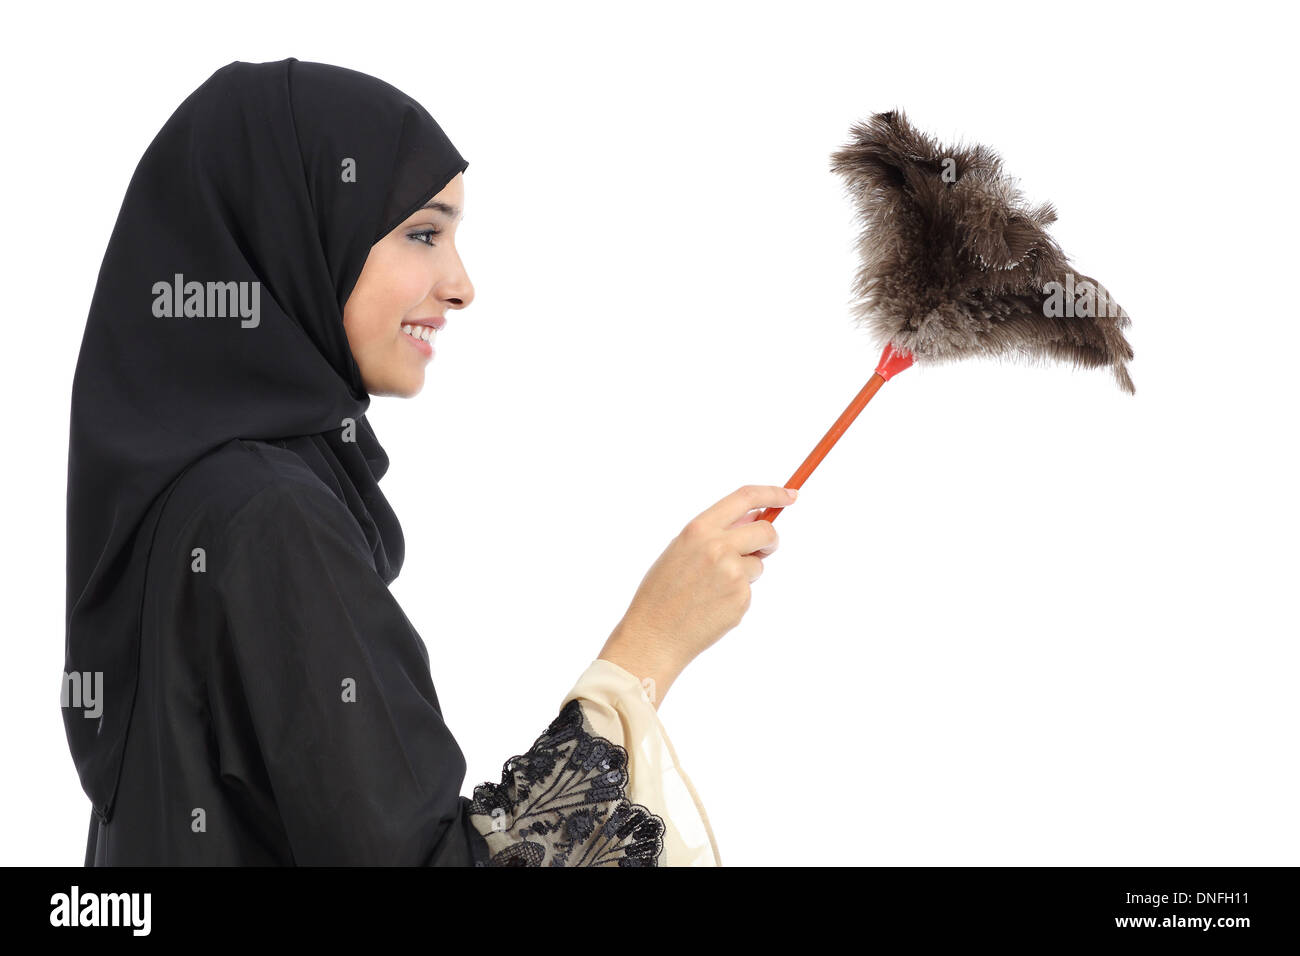 Profile of an arab woman cleaning with a duster clean isolated on a white background Stock Photo